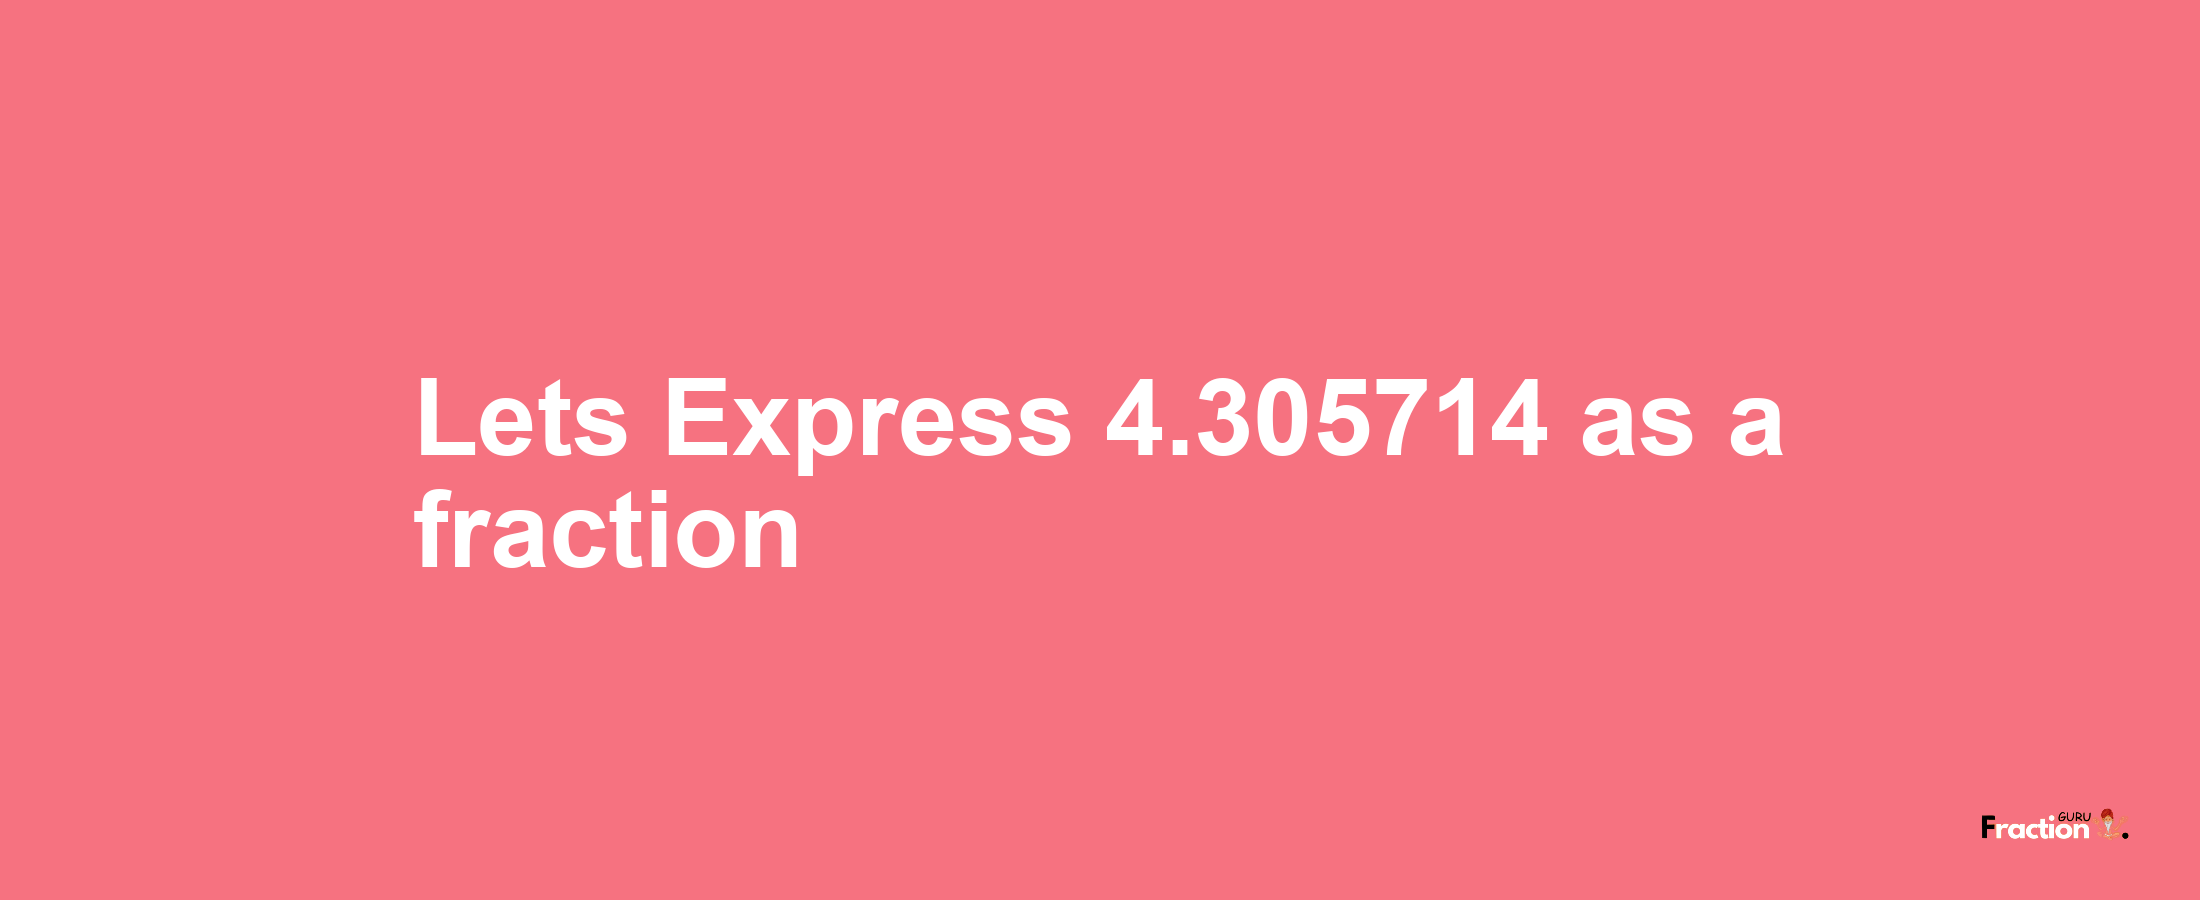 Lets Express 4.305714 as afraction